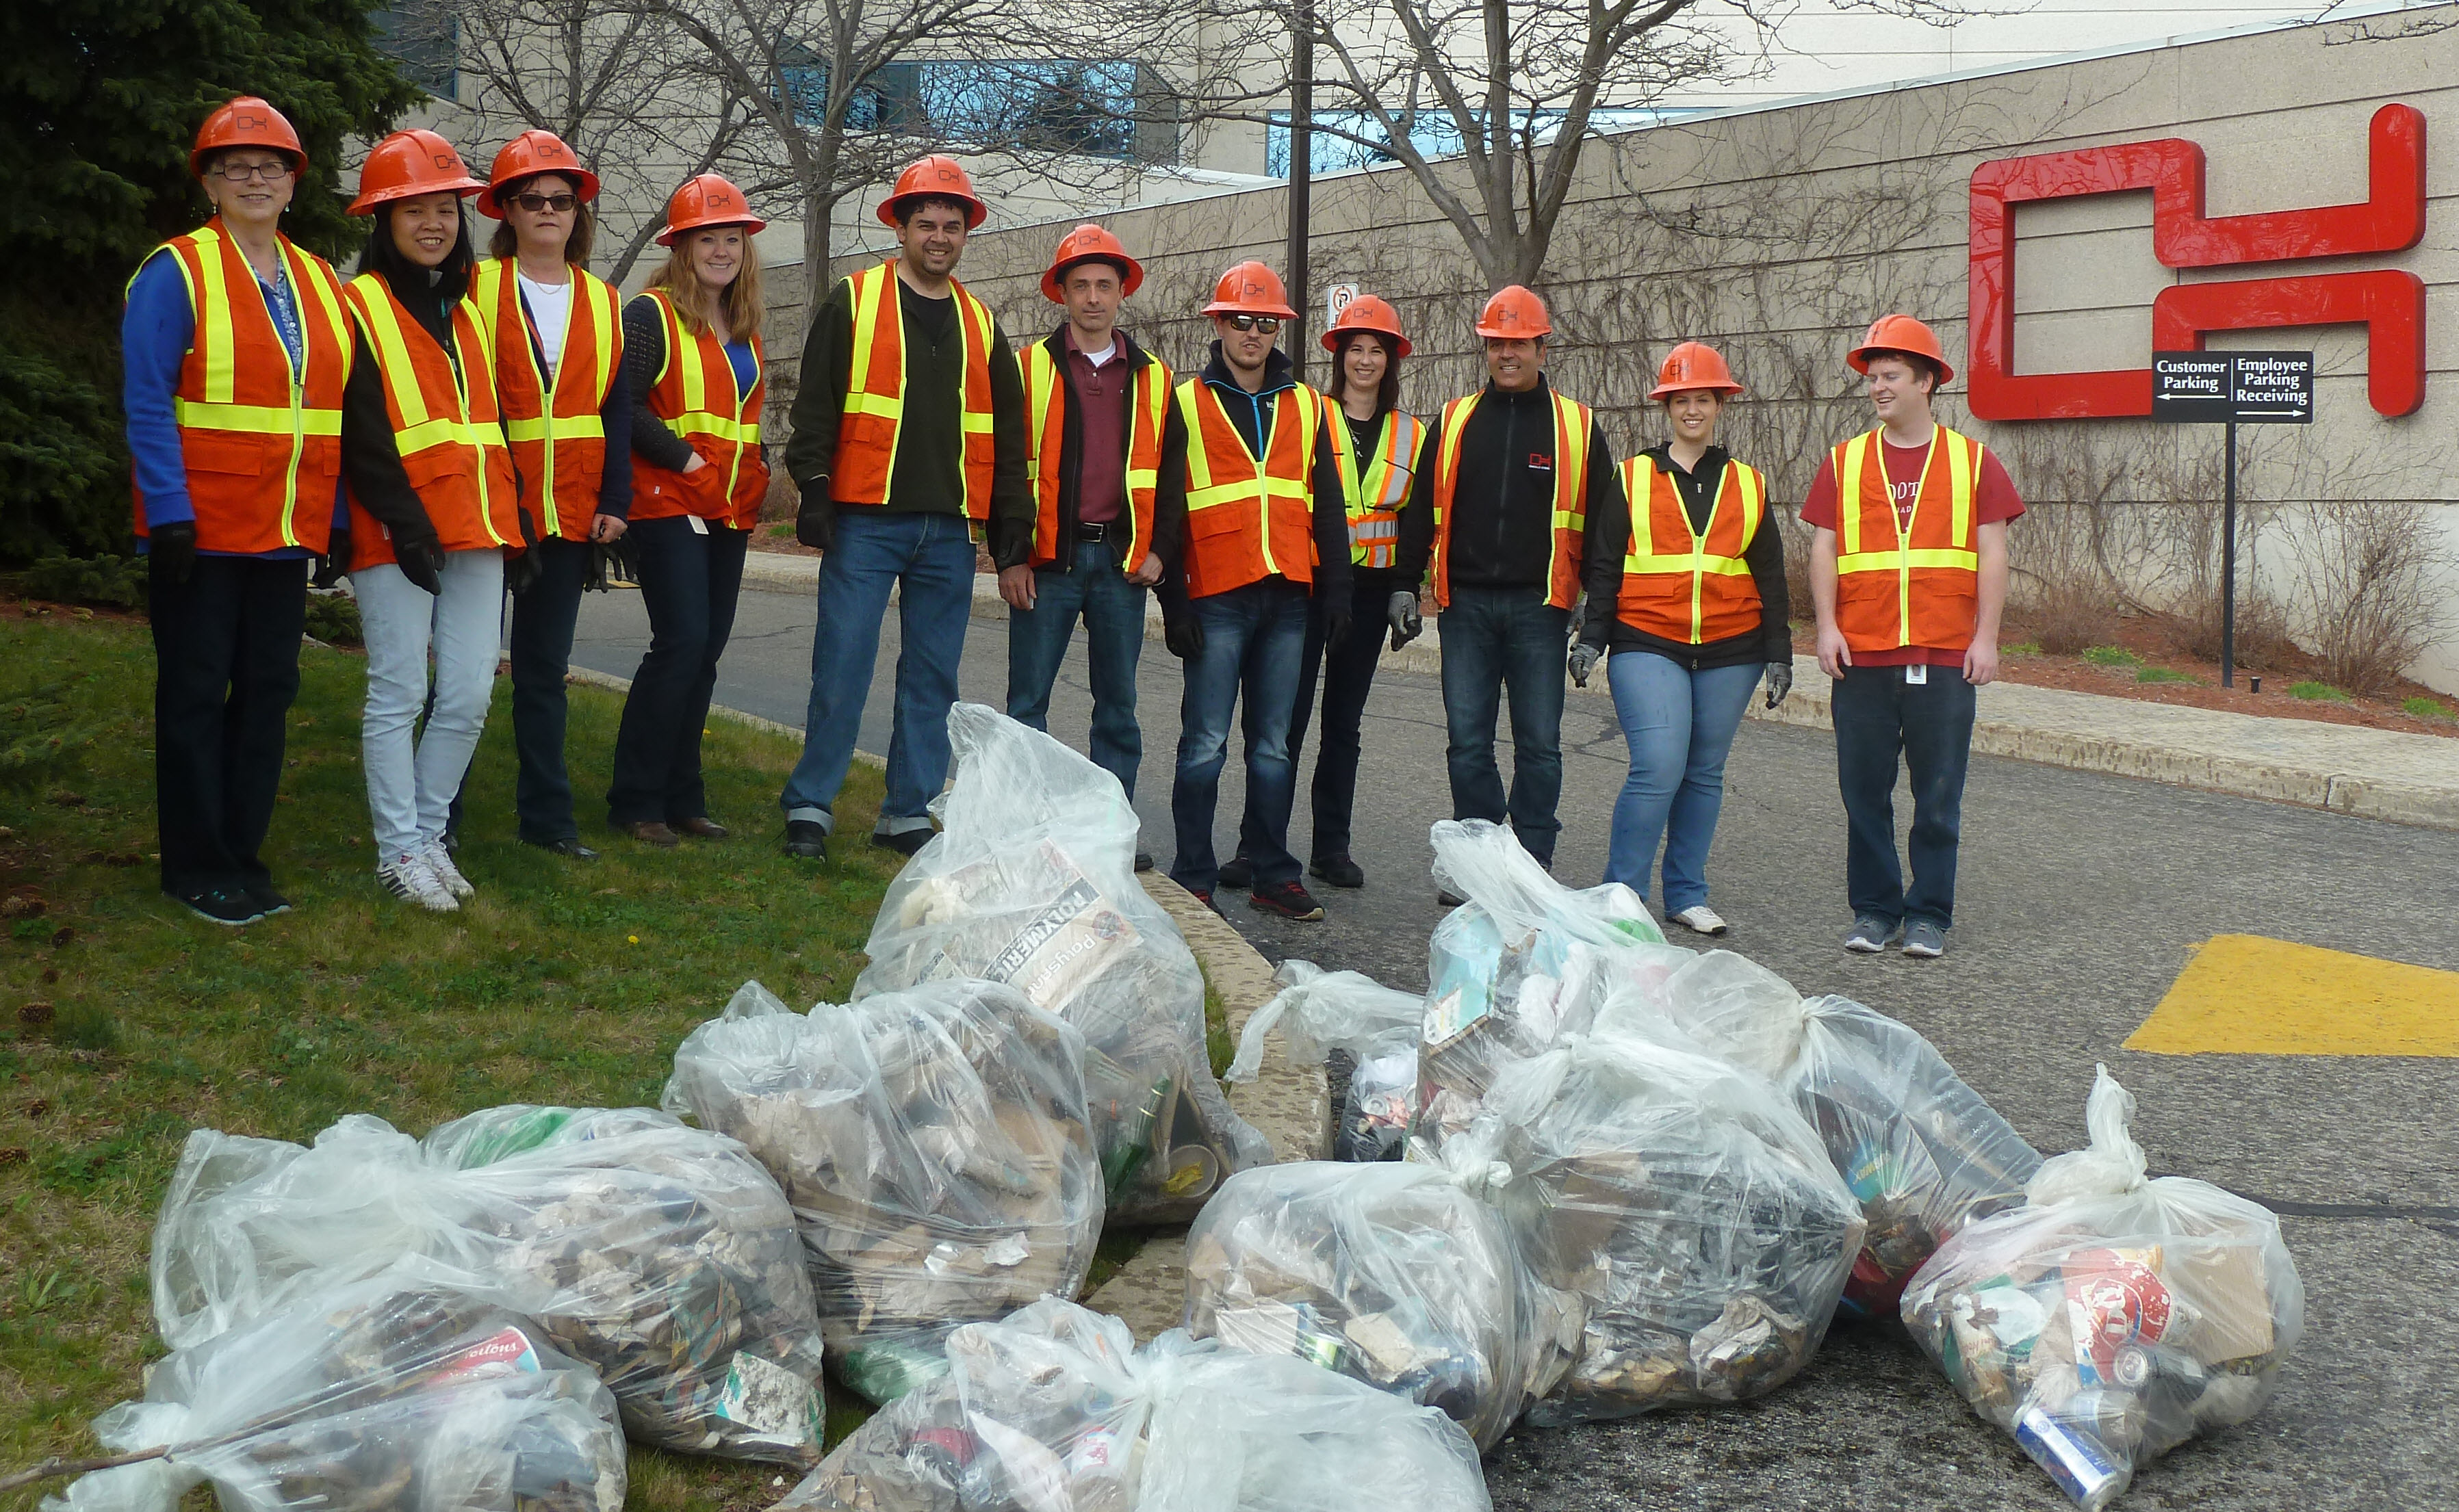 A group of Oakville Hydro employees gather with the bags of garbage collected during Clean Sweep